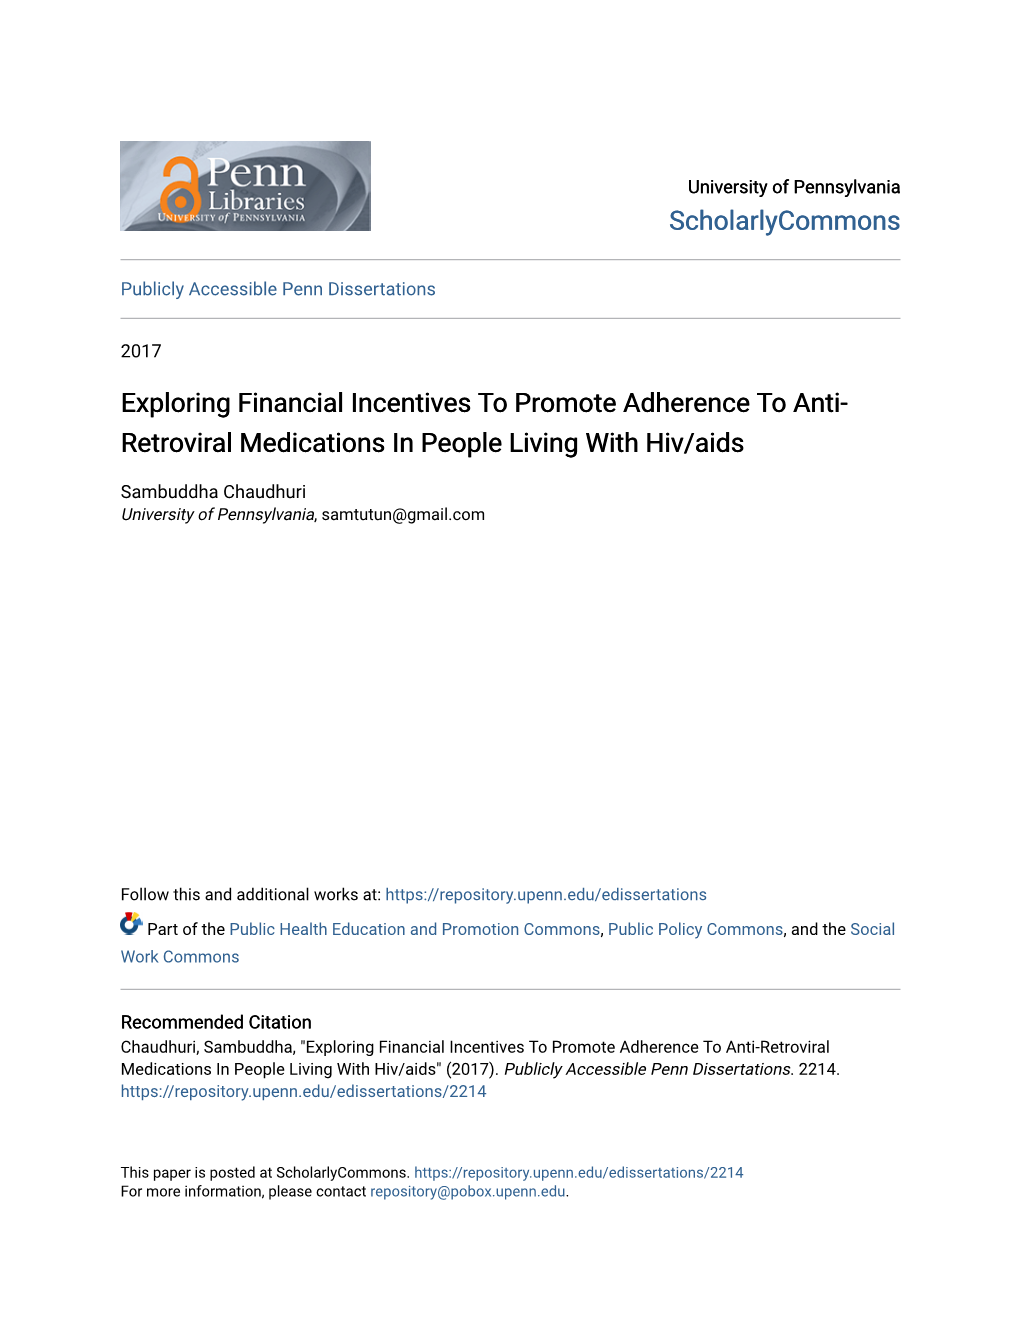 Exploring Financial Incentives to Promote Adherence to Anti-Retroviral Medications in People Living with Hiv/Aids" (2017)